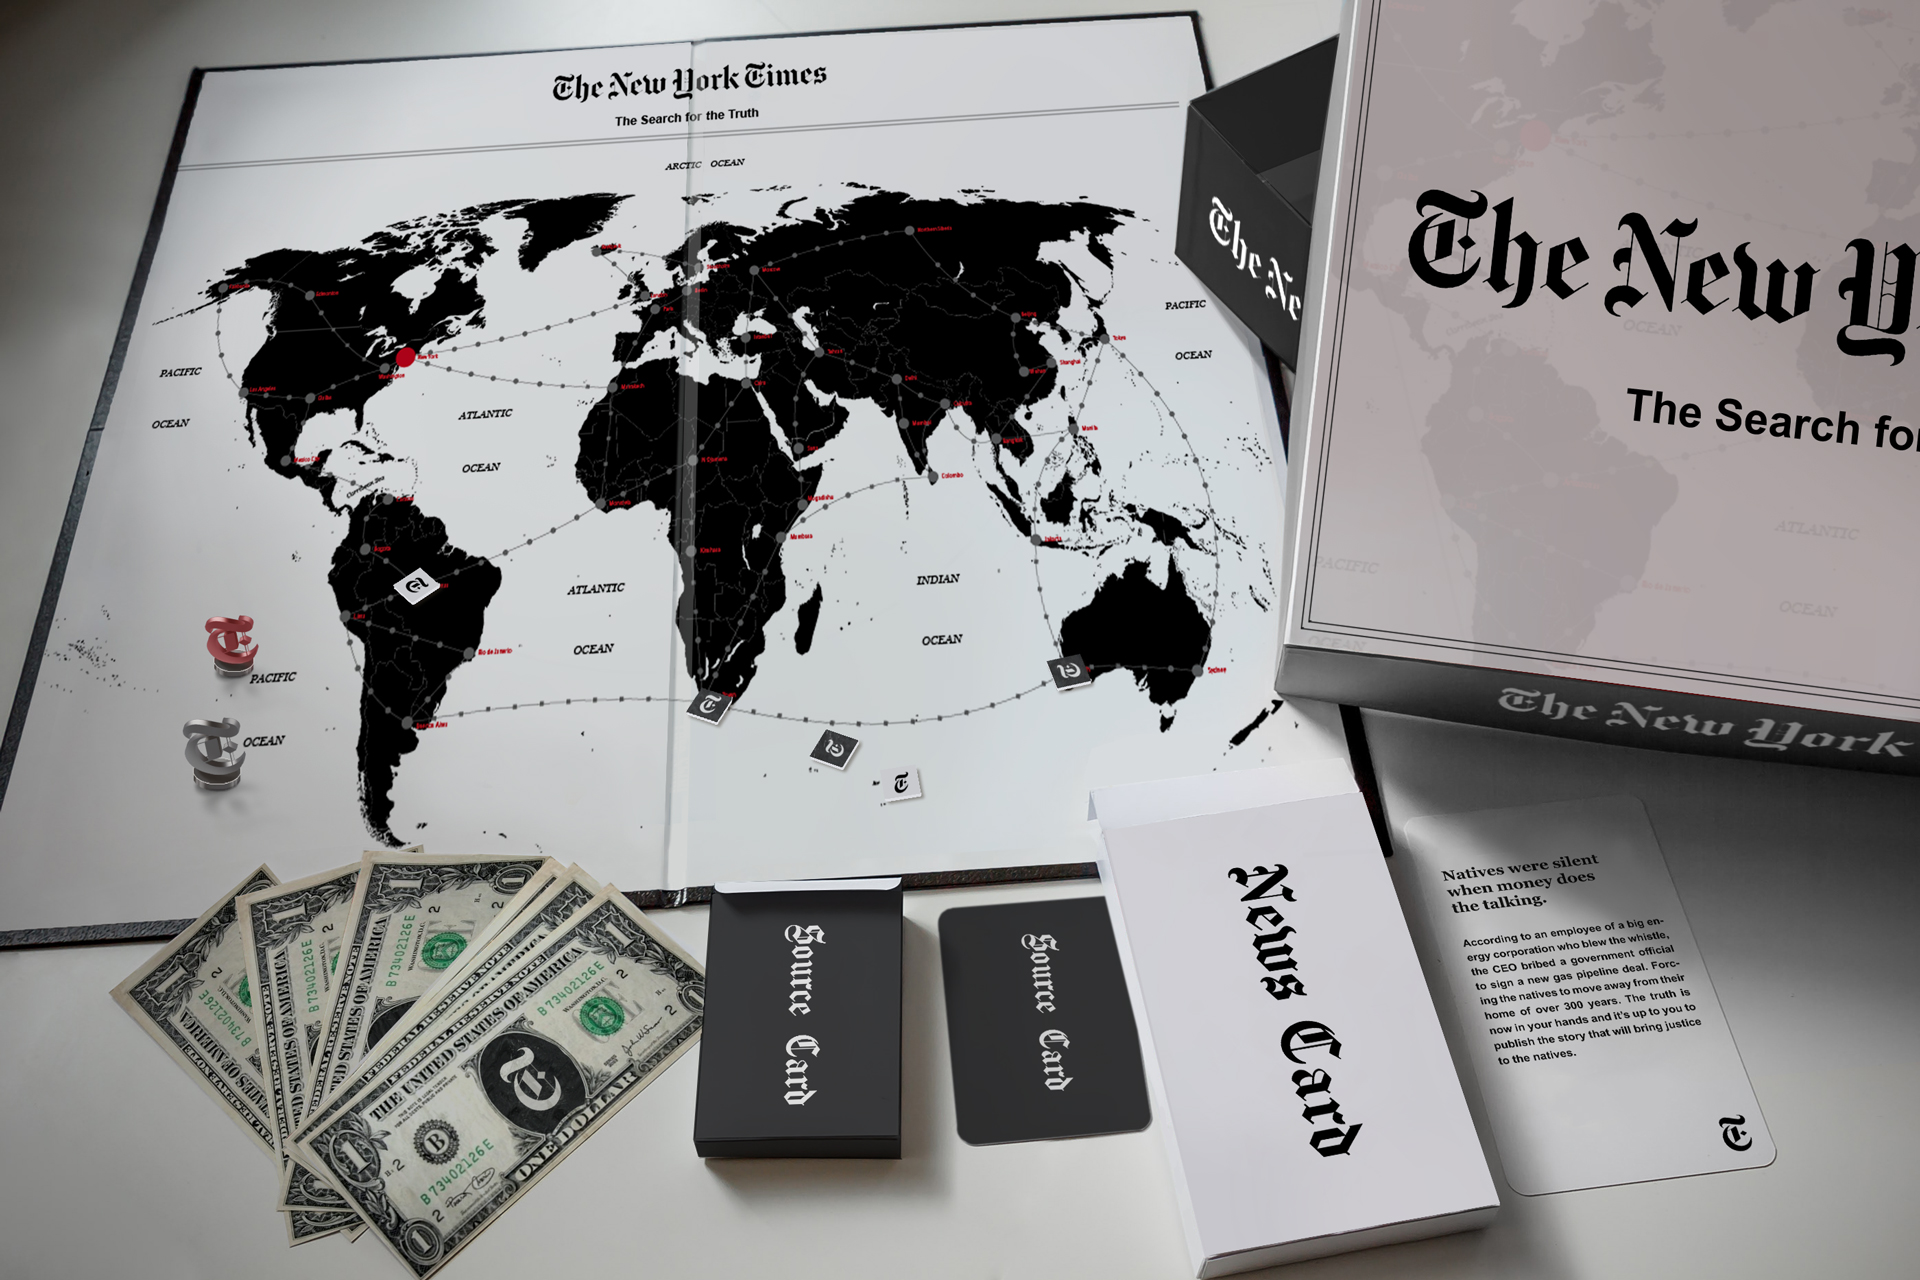 Mockup of the board game set of The New York Times: The Search for the truth